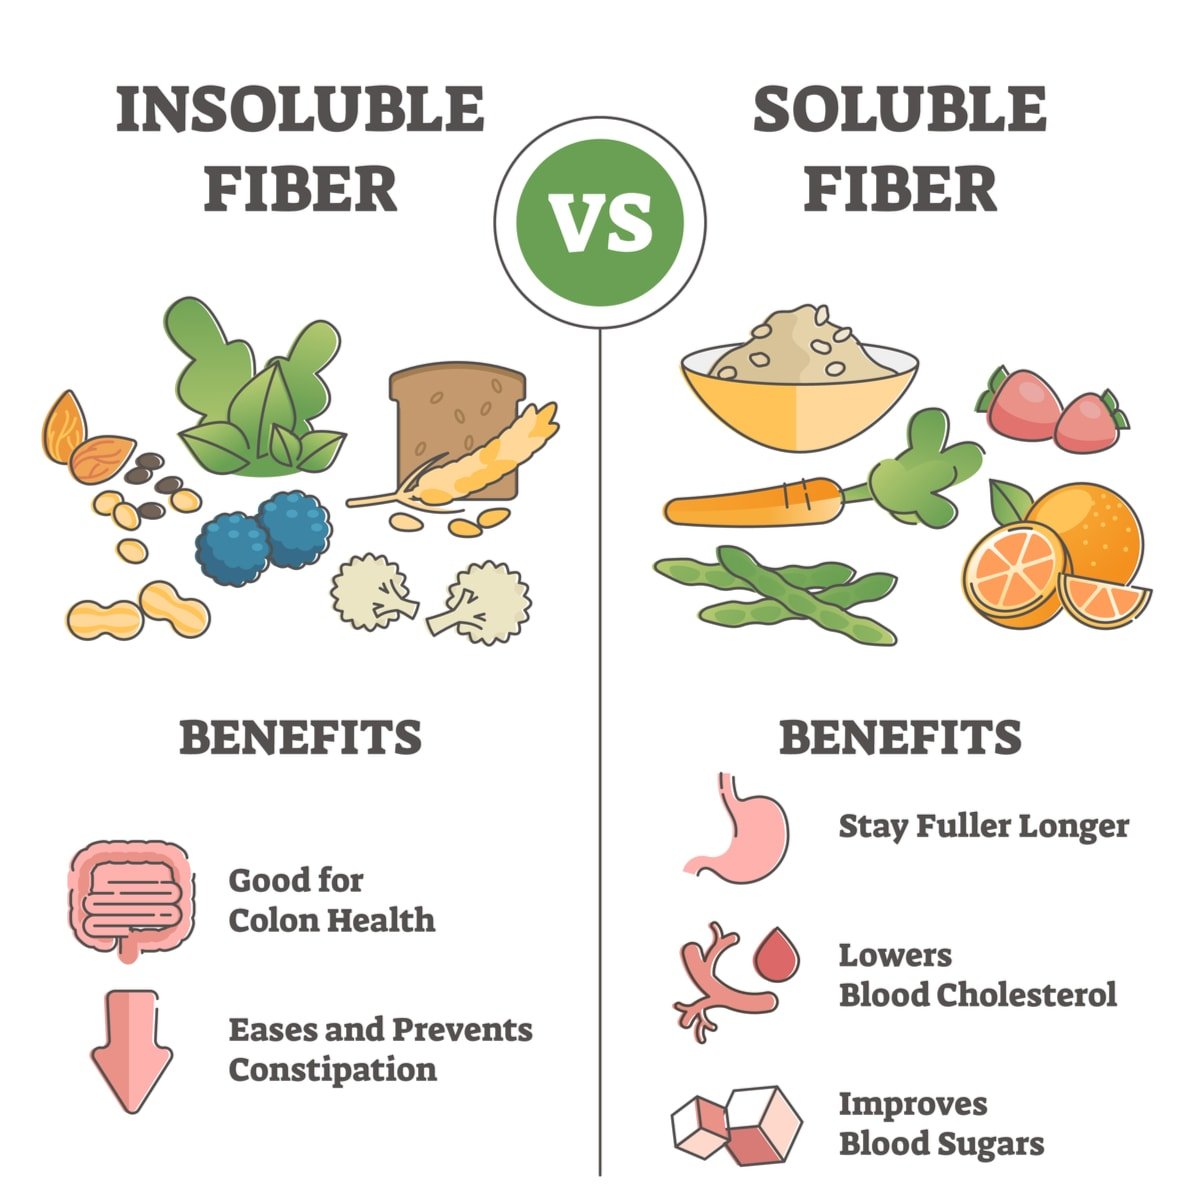 Soluble and insoluble fiber